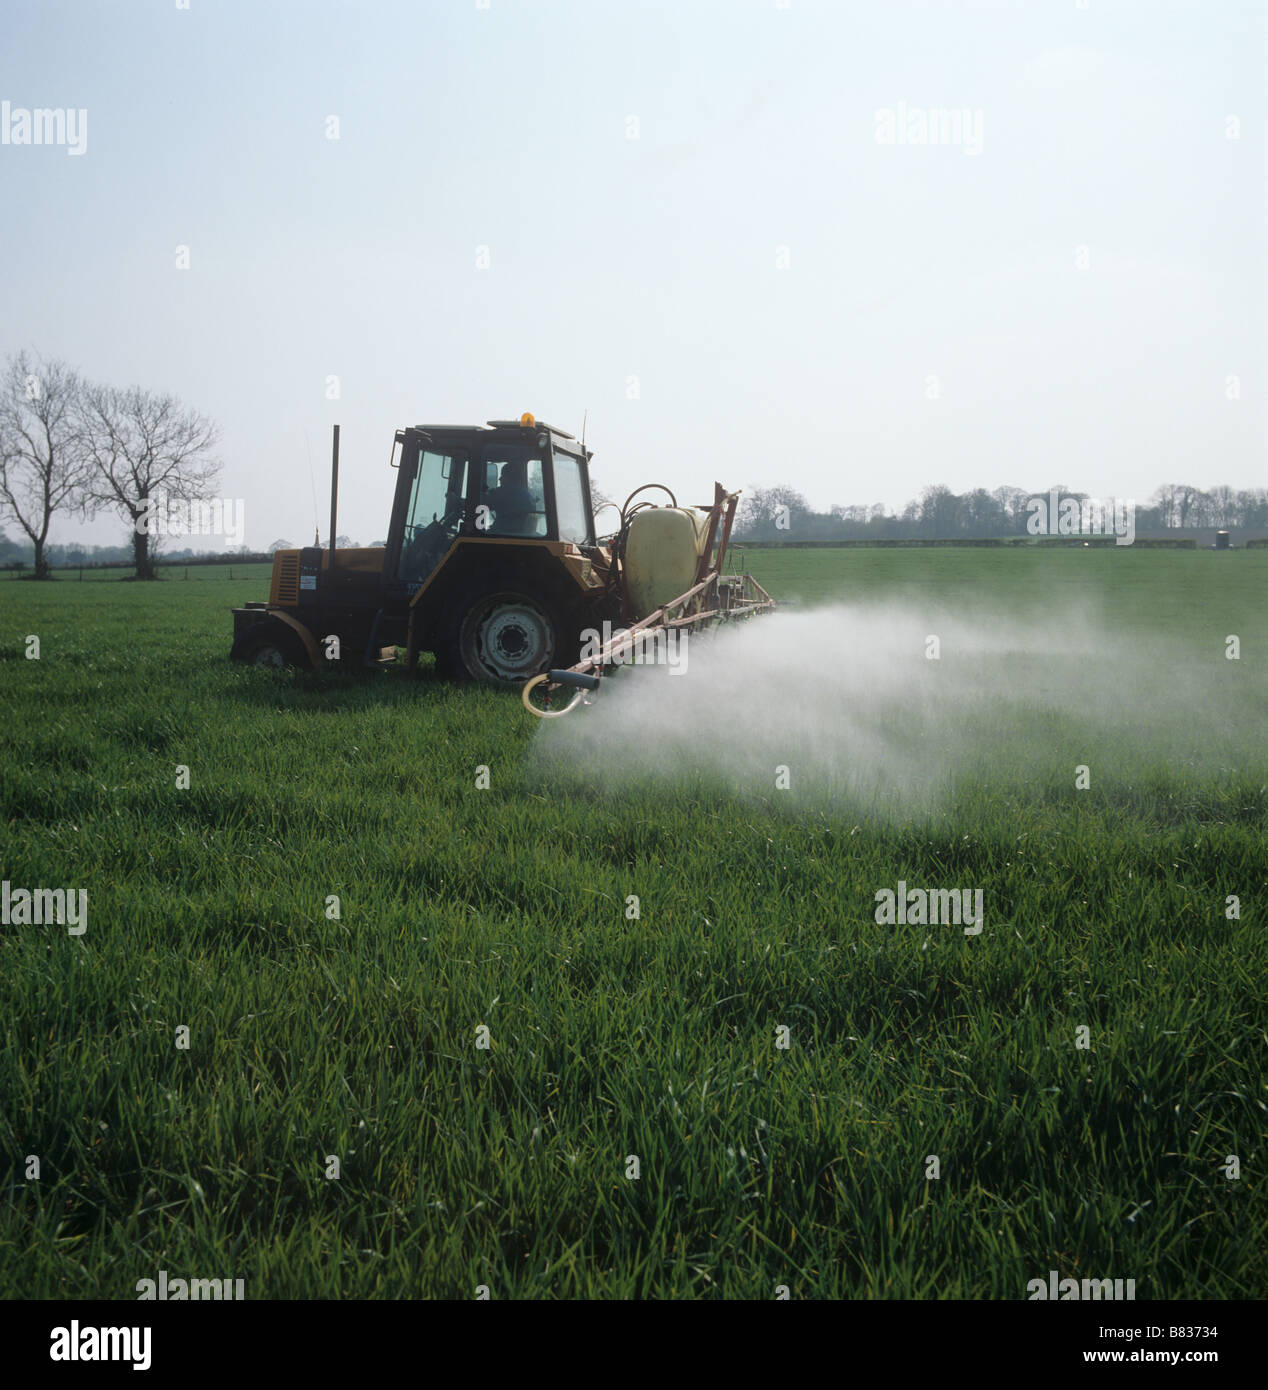 Renault tractor with a Hardi sprayer spraying a young barley crop in spring Stock Photo